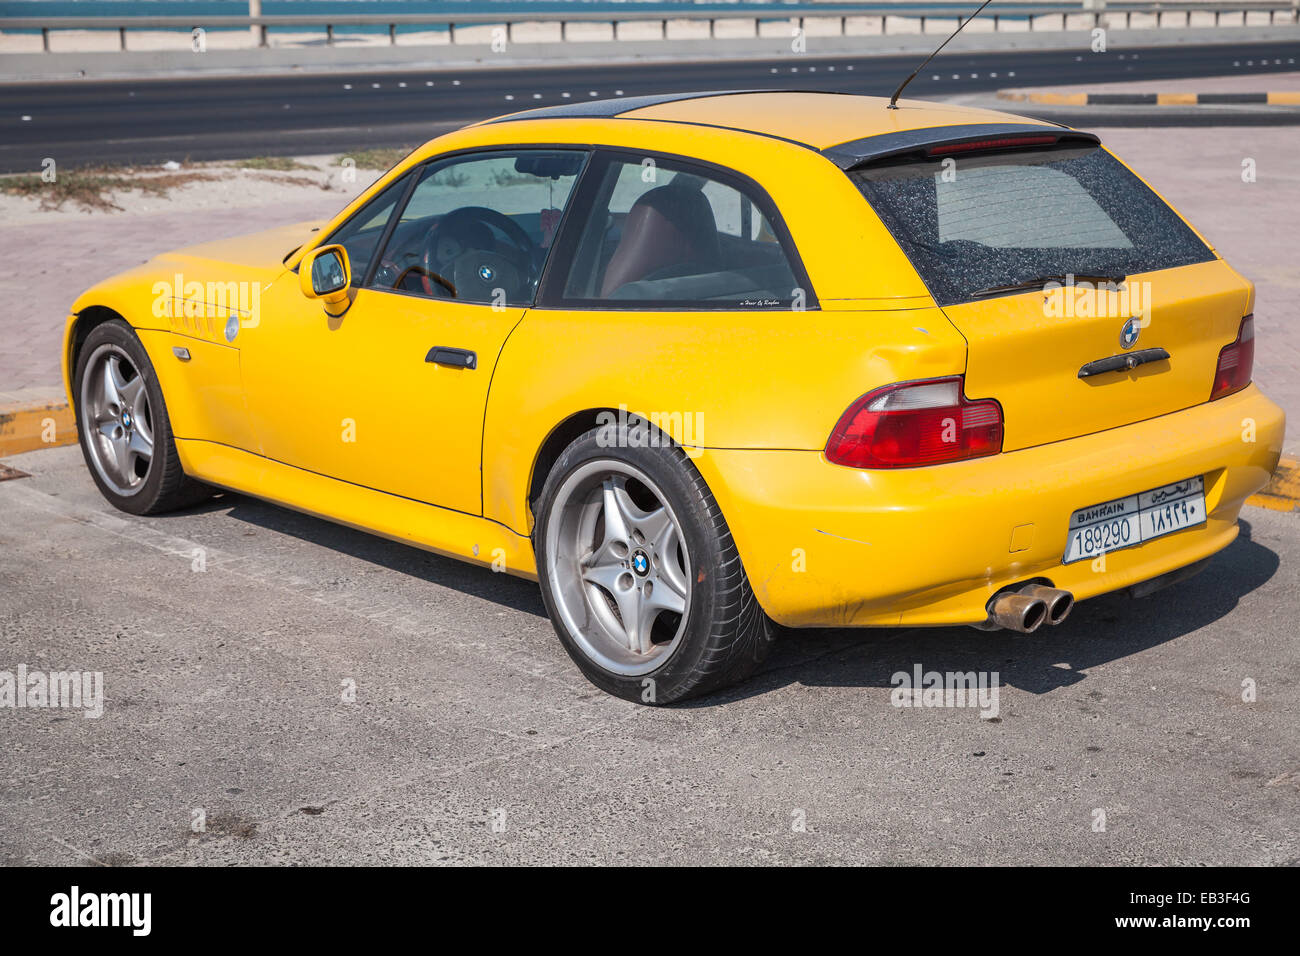 Manama, Bahrain - November 21, 2014: Yellow BMW Z3 M Coupe car stands parked on the roadside Stock Photo